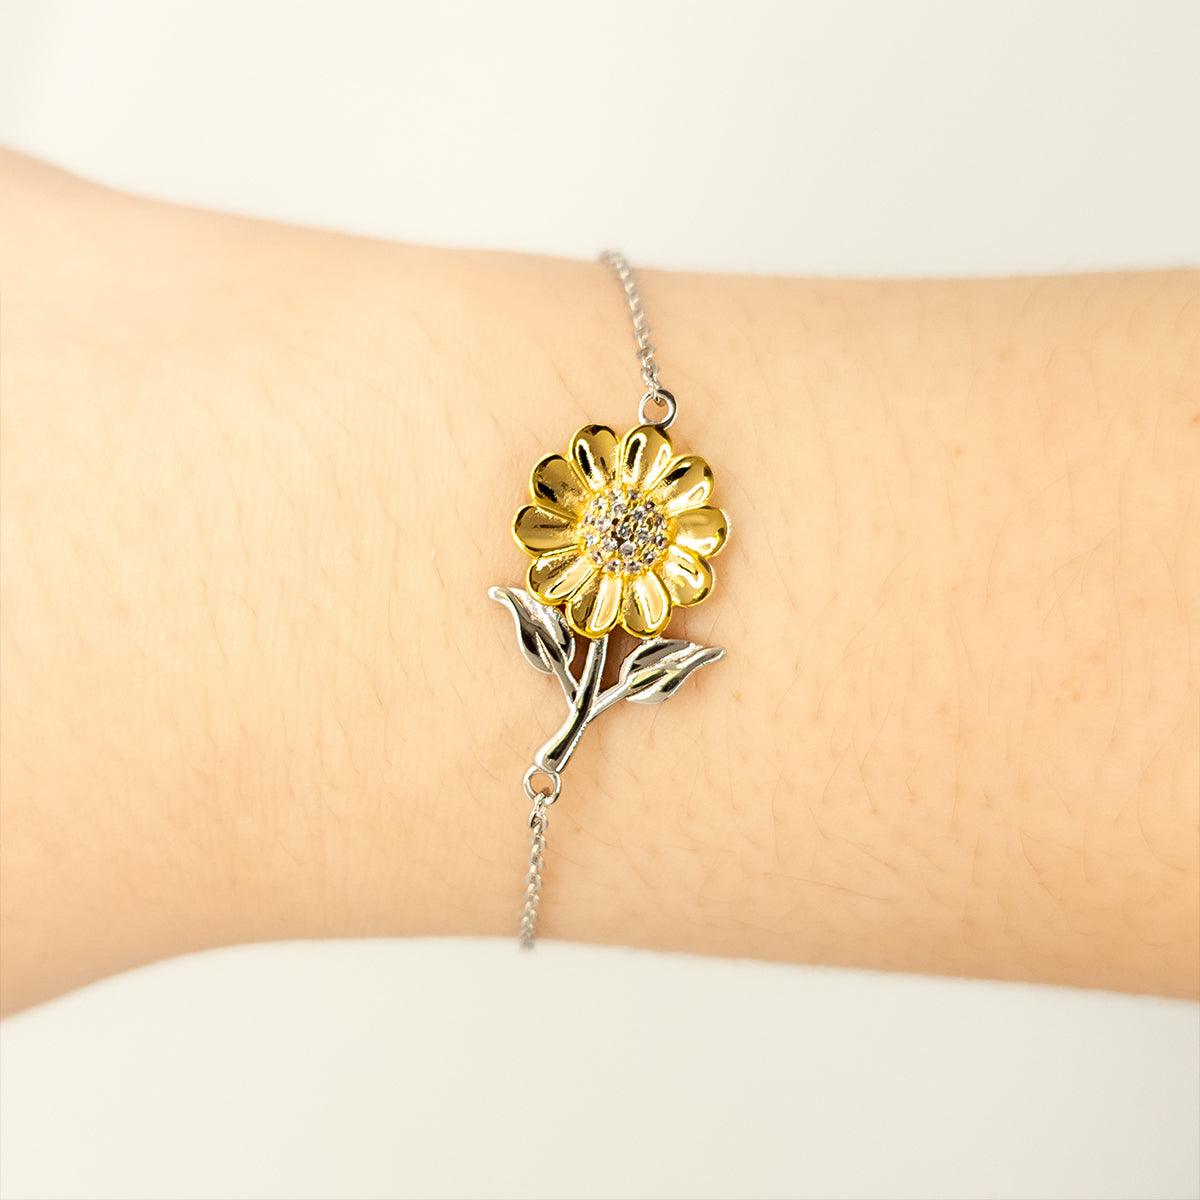 Sarcastic Athletic Trainer Sunflower Bracelet Gifts, Christmas Holiday Gifts for Athletic Trainer Birthday Message Card, Athletic Trainer: Because greatness is woven into the fabric of every day, Coworkers, Friends - Mallard Moon Gift Shop